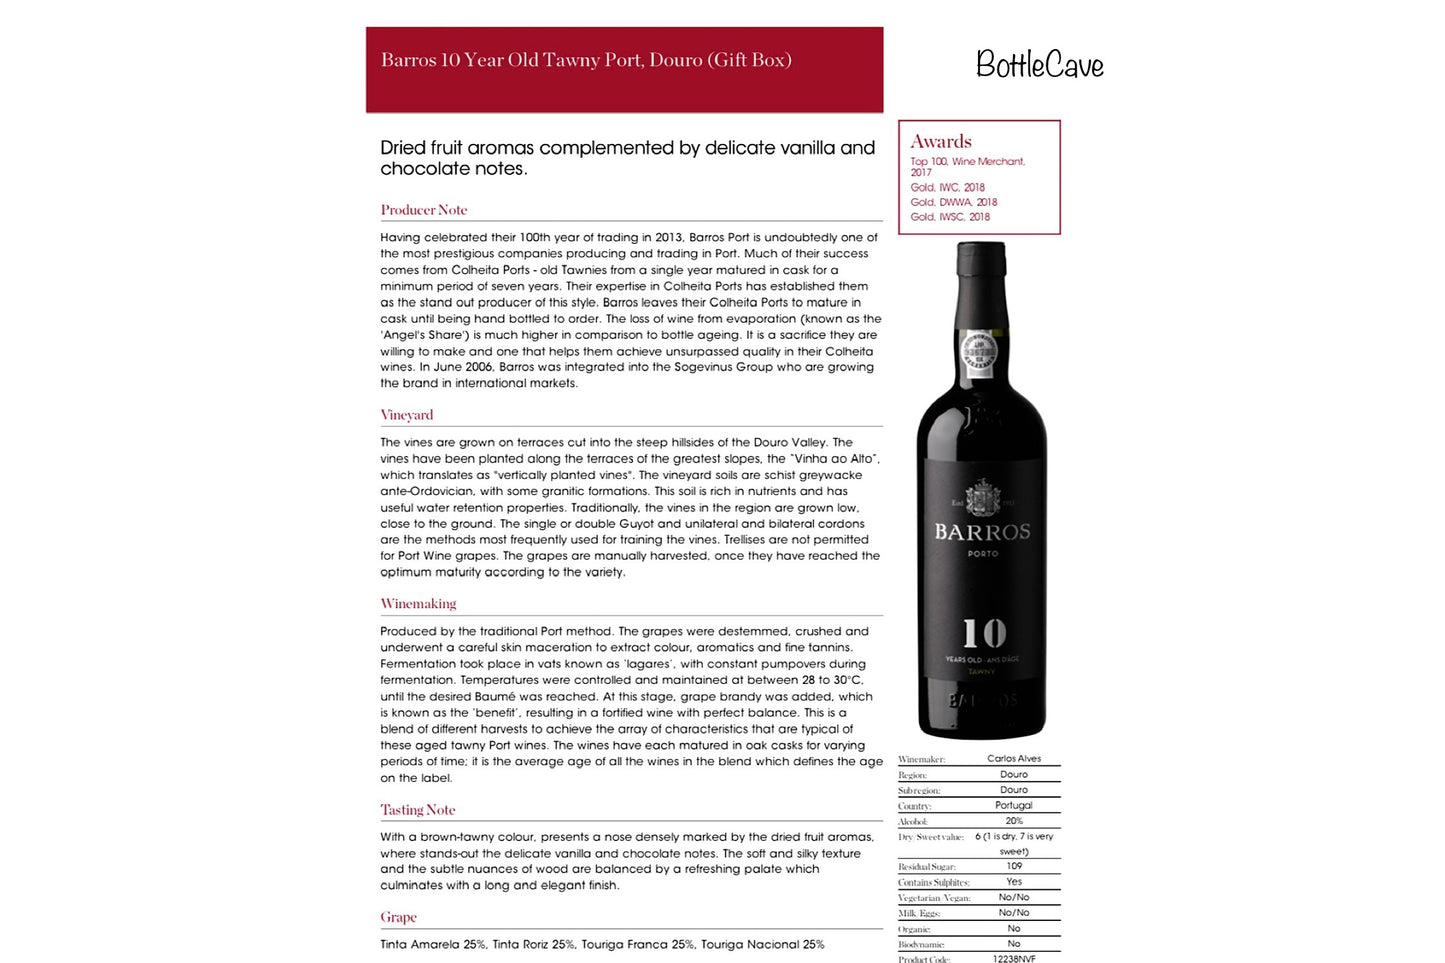 Barros 10 Year Old Tawny Port, Douro NV |20%| 75cl